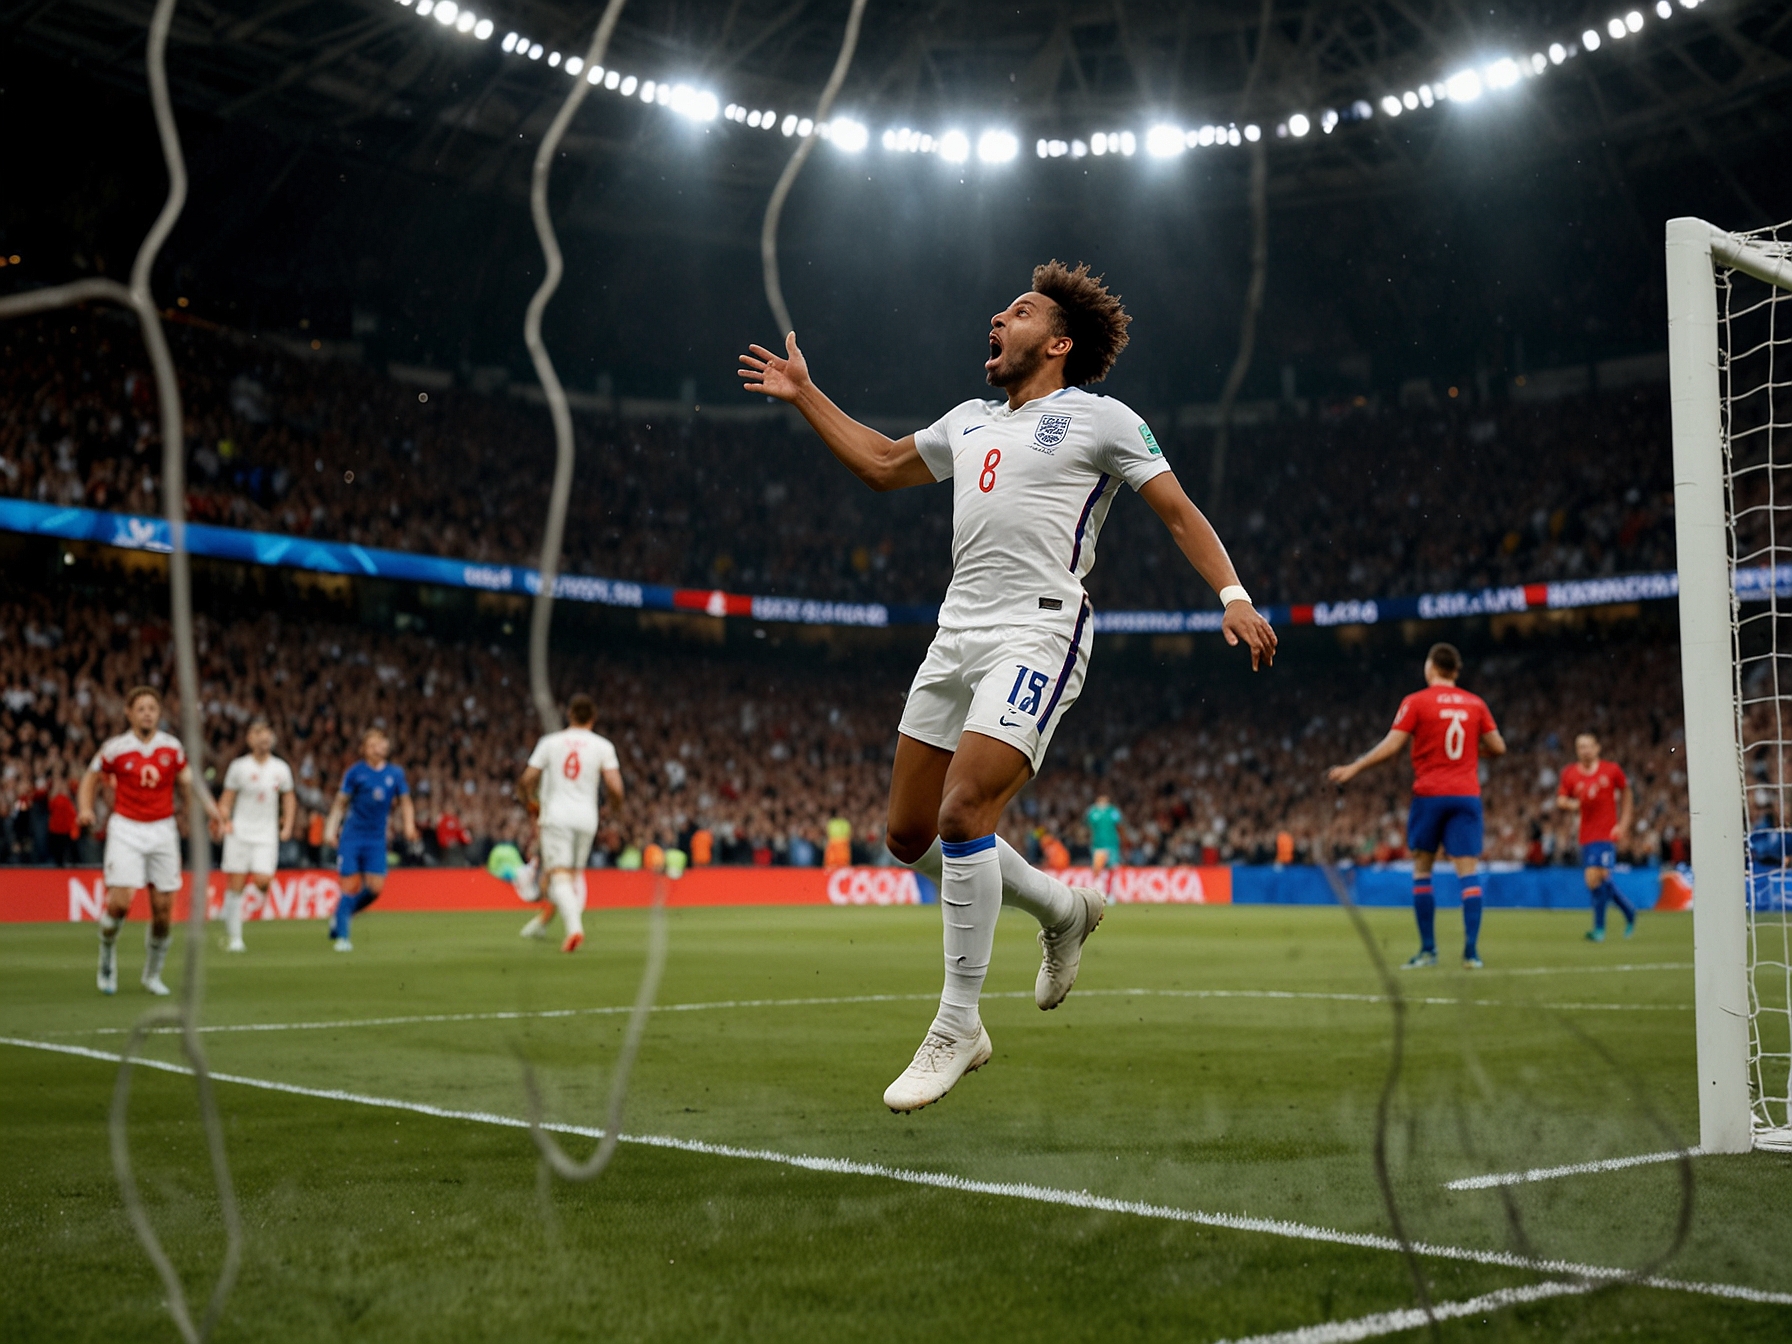 Jude Bellingham leaps to head the ball into the net, scoring England's first goal against Serbia in the UEFA Euro 2024 Group C opener.